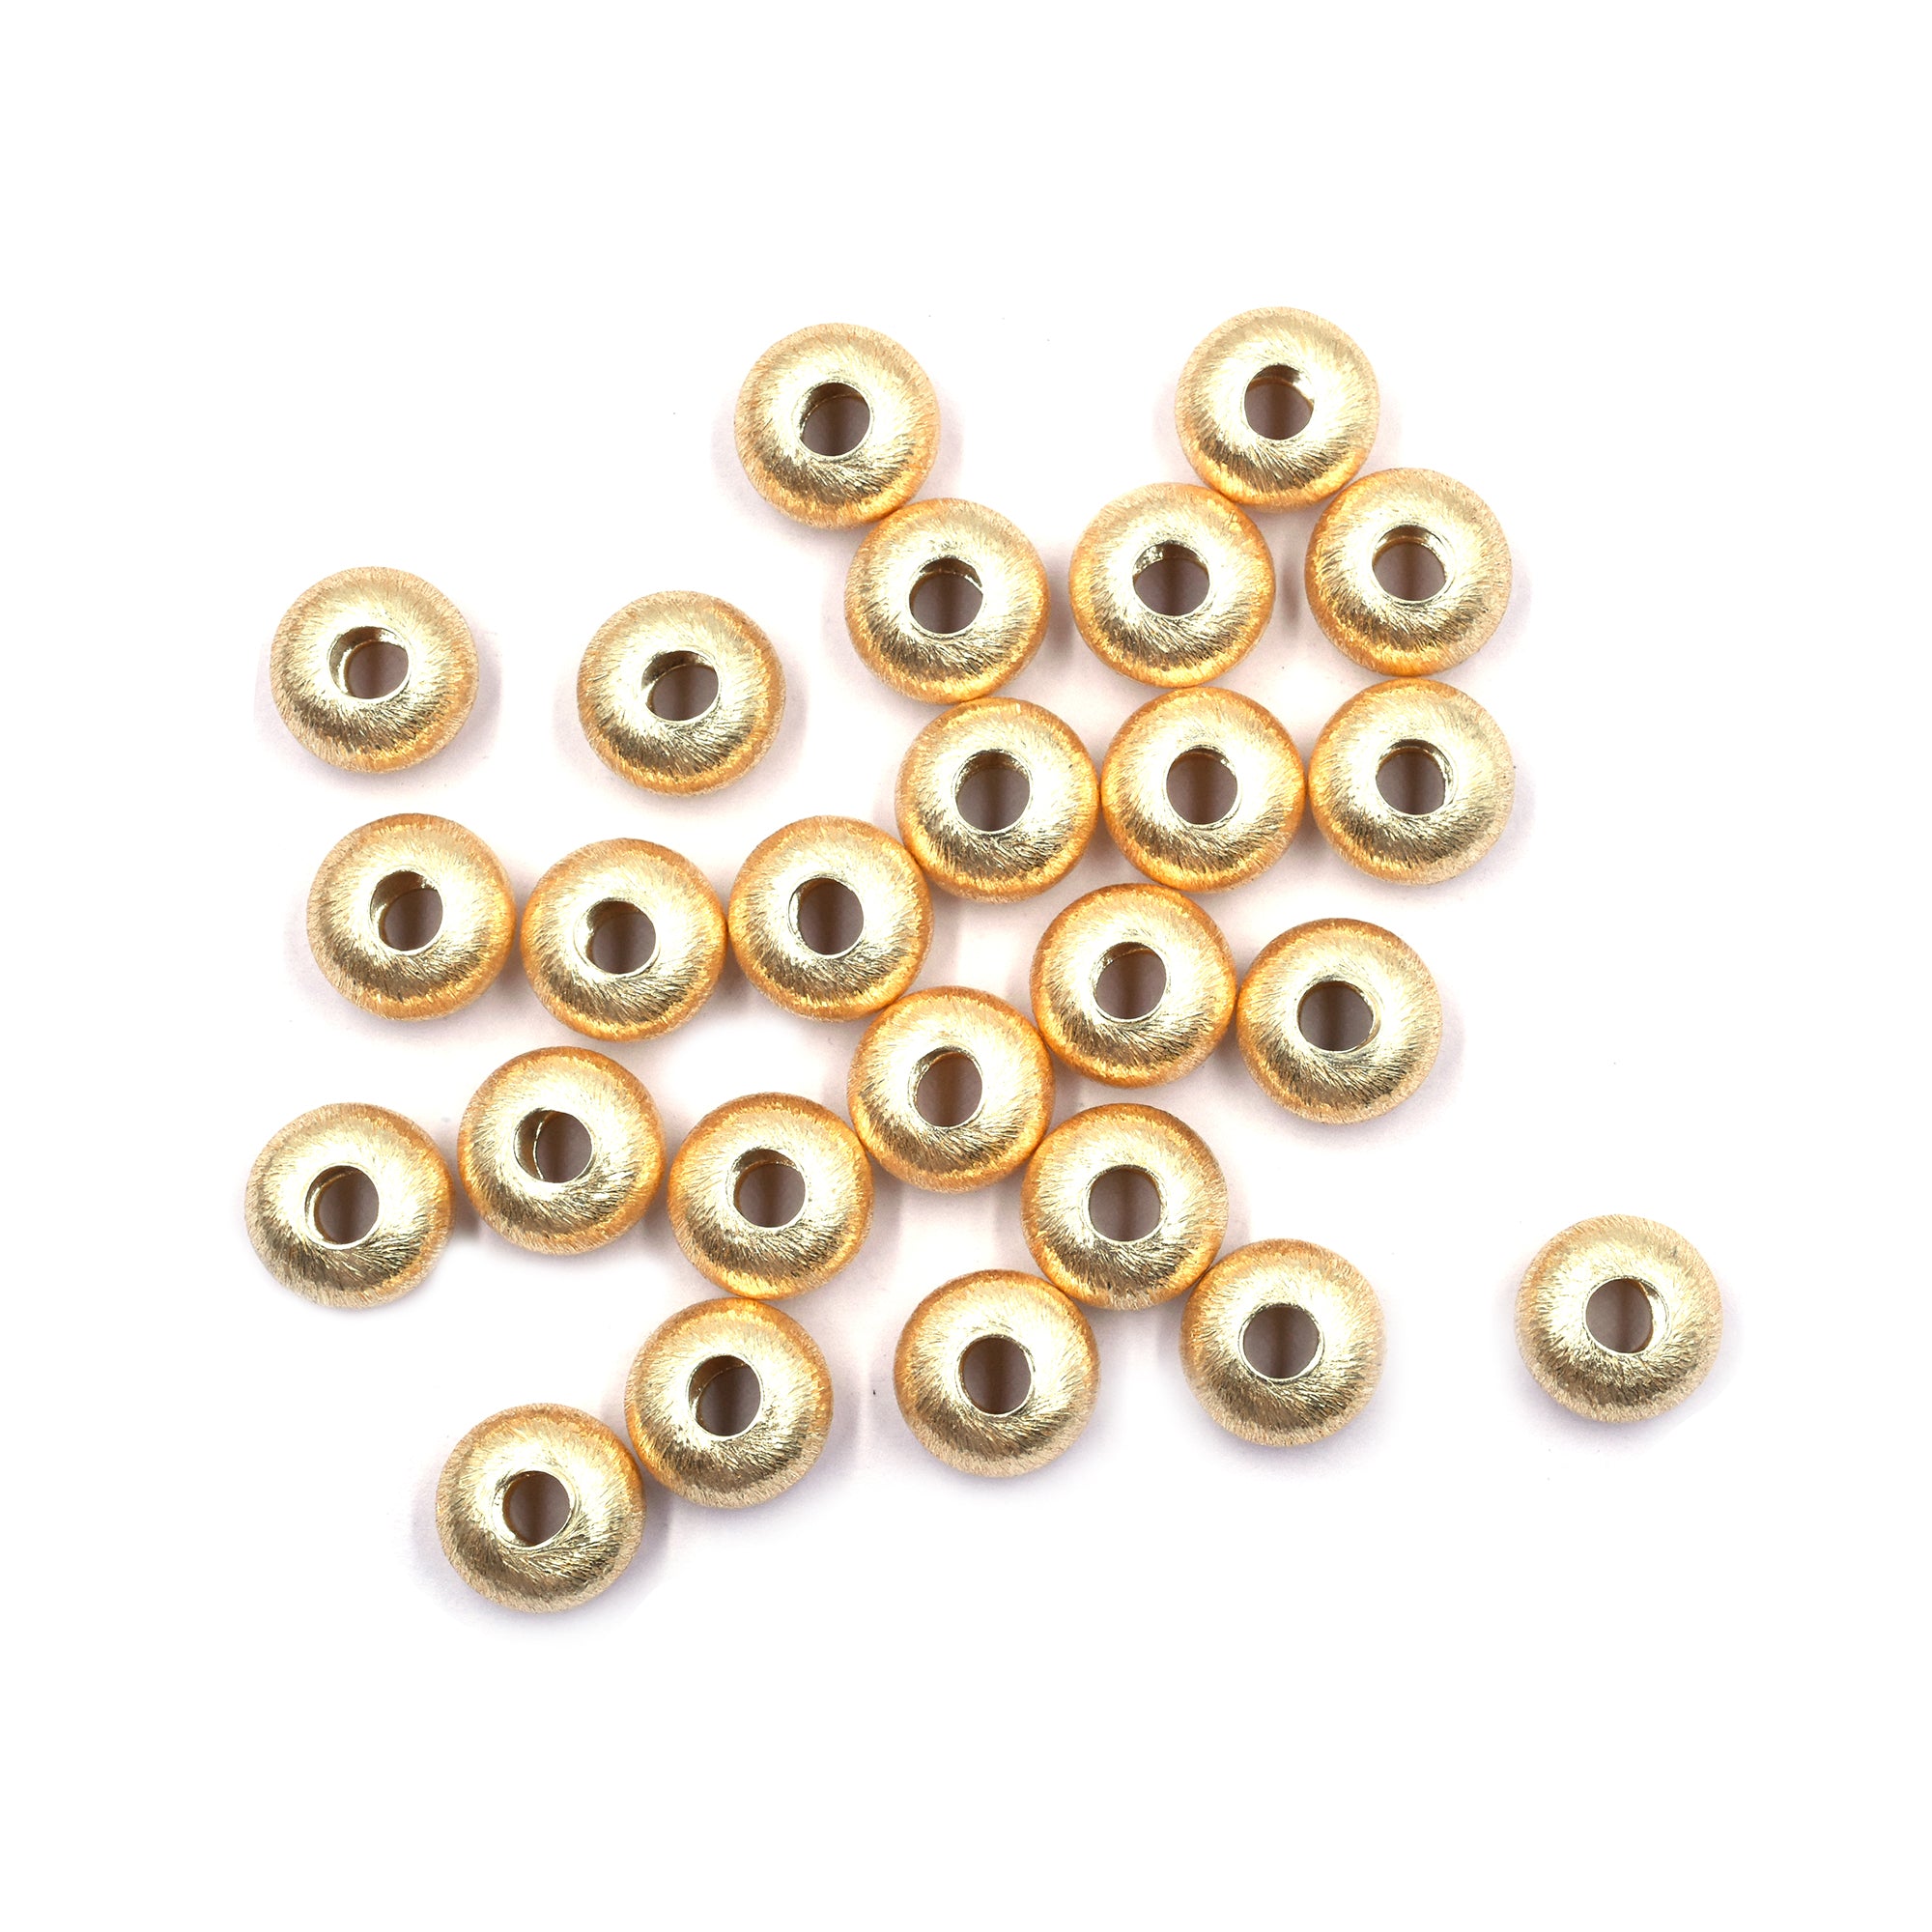 20 Pcs 12mm Donut Brushed Matte Finish Beads Gold Plated Copper